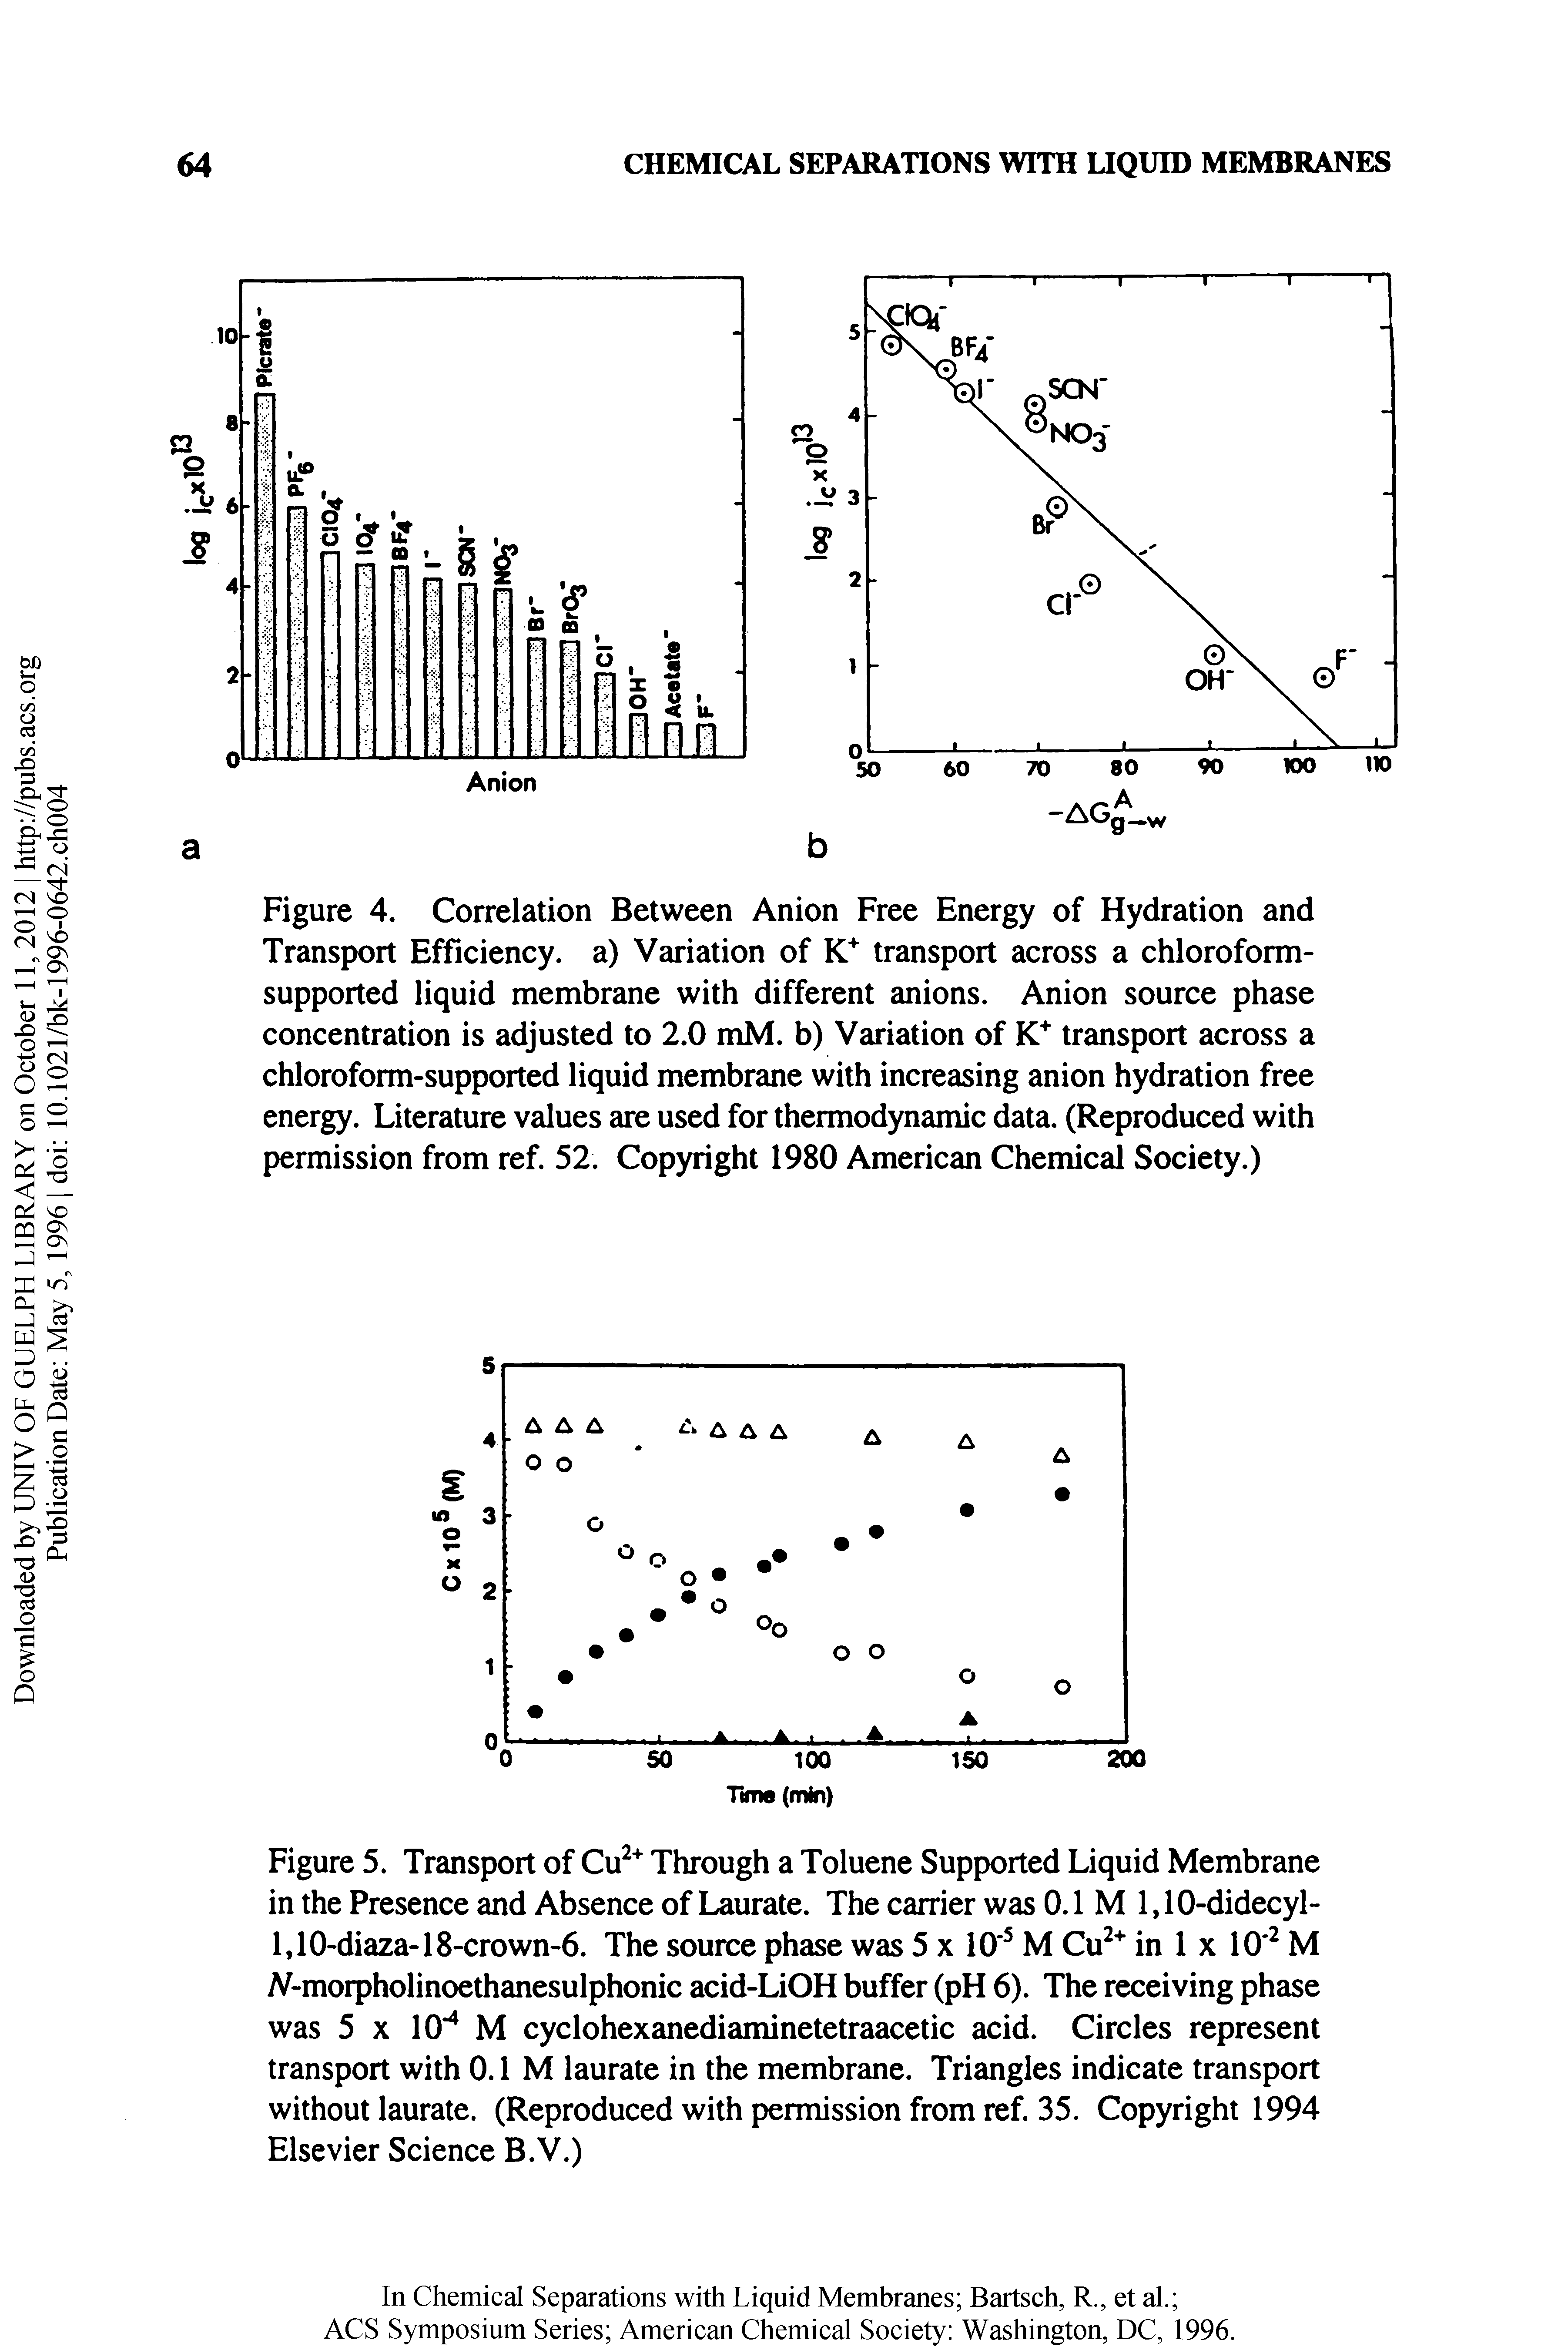 Figure 5. Transport of Cu "" Through a Toluene Supported Liquid Membrane in the Presence and Absence of Laurate. The carrier was 0.1 M 1,10-didecyl-l,10-diaza-18-crown-6. The source phase was 5 x 10 M Cu " in 1 x 10 M V-morpholinoethanesulphonic acid-LiOH buffer (pH 6). The receiving phase was 5 X 10 M cyclohexanediaminetetraacetic acid. Circles represent transport with 0.1 M laurate in the membrane. Triangles indicate transport without laurate. (Reproduced with permission from ref. 35. Copyright 1994 Elsevier Science B.V.)...